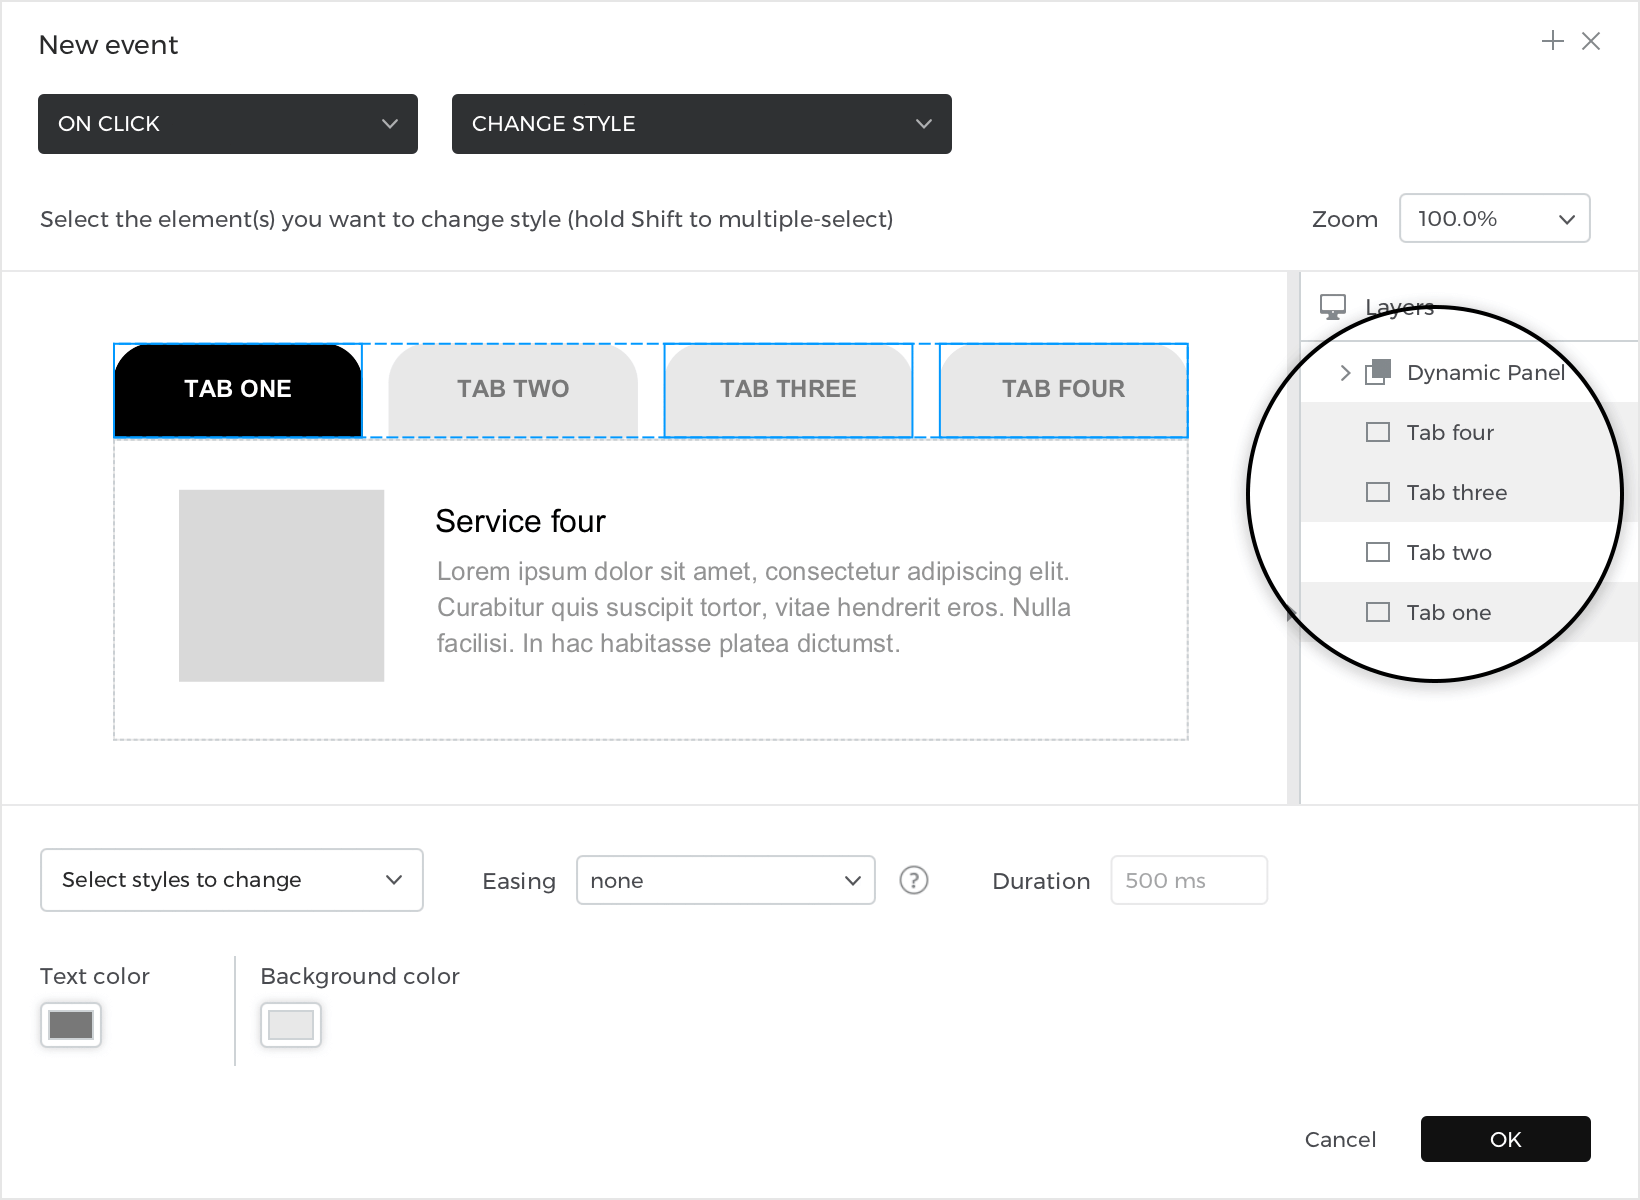 Select panels one, three, and four to change style. Deselect tab two.